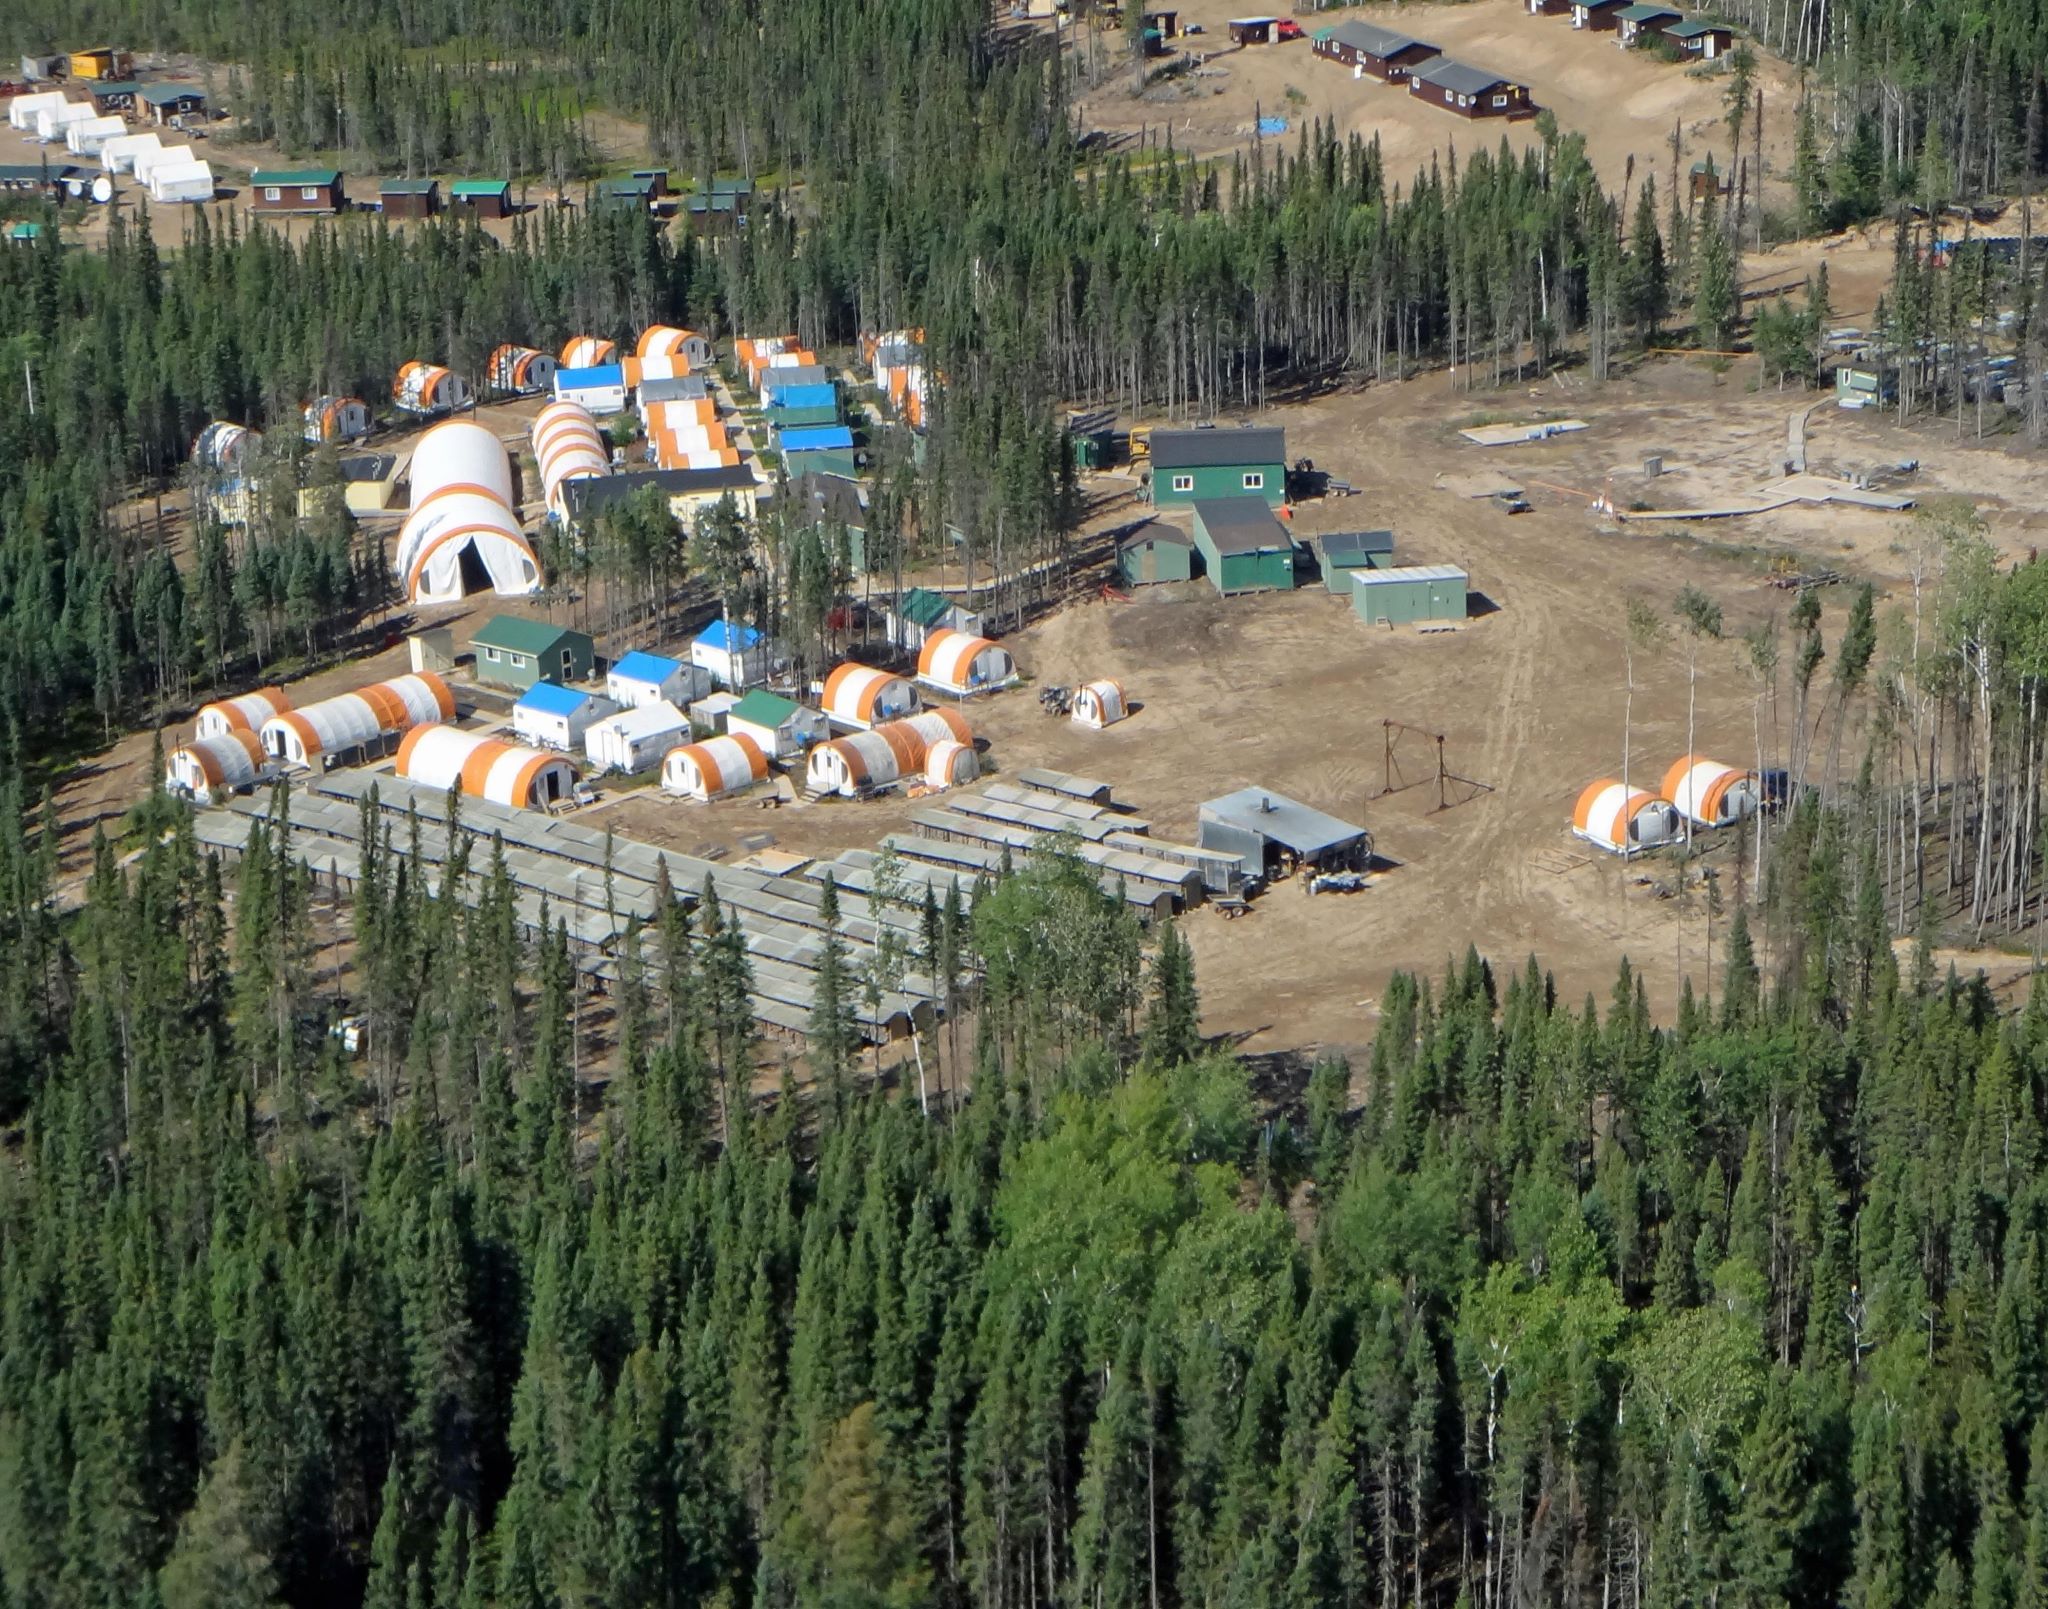 An aerial view of a camp in a clearing in the forest, with buildings and tents with rounded roofs.